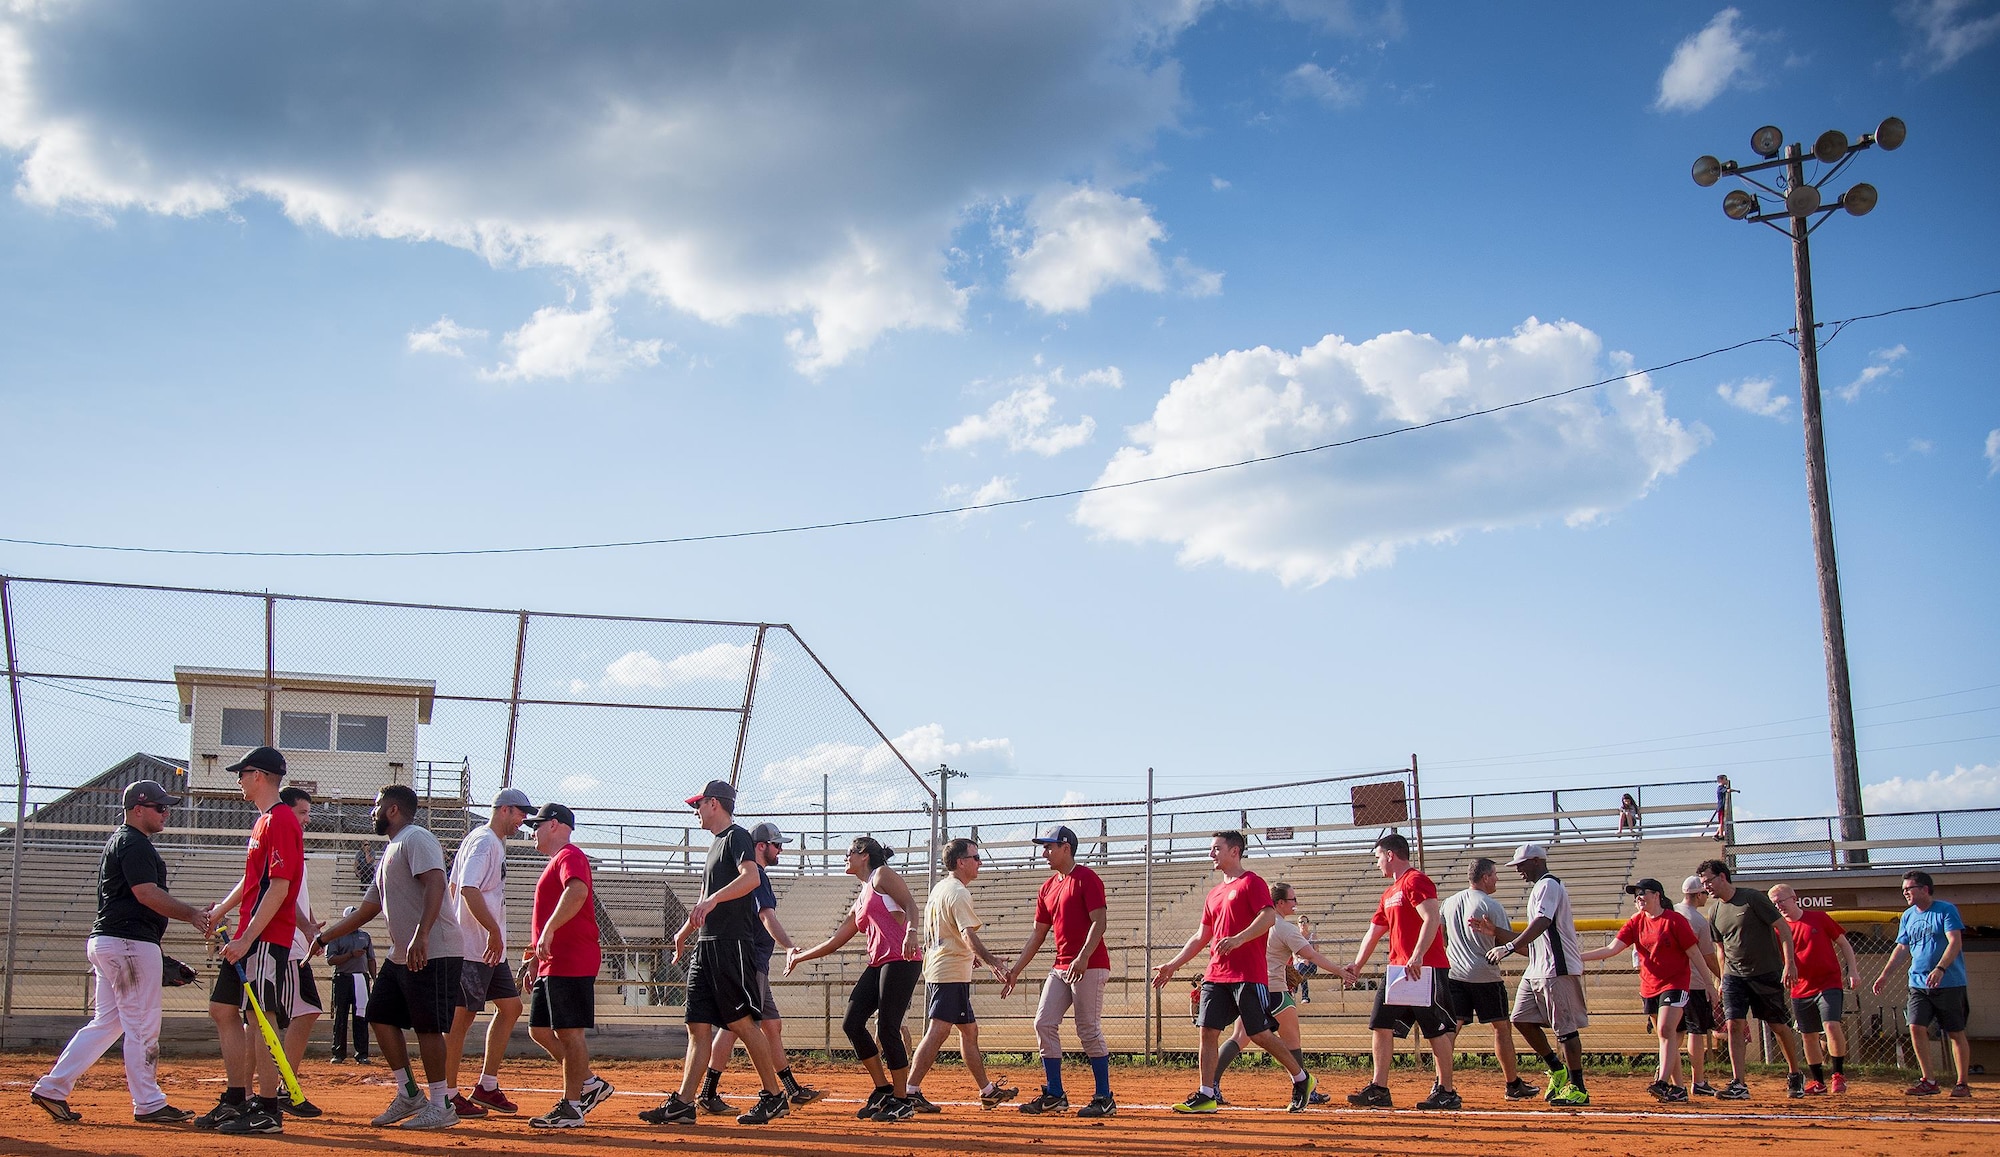 The first Thursday intramural softball game comes to an end under a blue sky at Eglin Air Force Base, Fla., June 8.  The Armament Directorate team (left) bashed the hapless Air Force Research Lab team (right) 14-4 in five innings of play.  (U.S. Air Force photo/Samuel King Jr.)